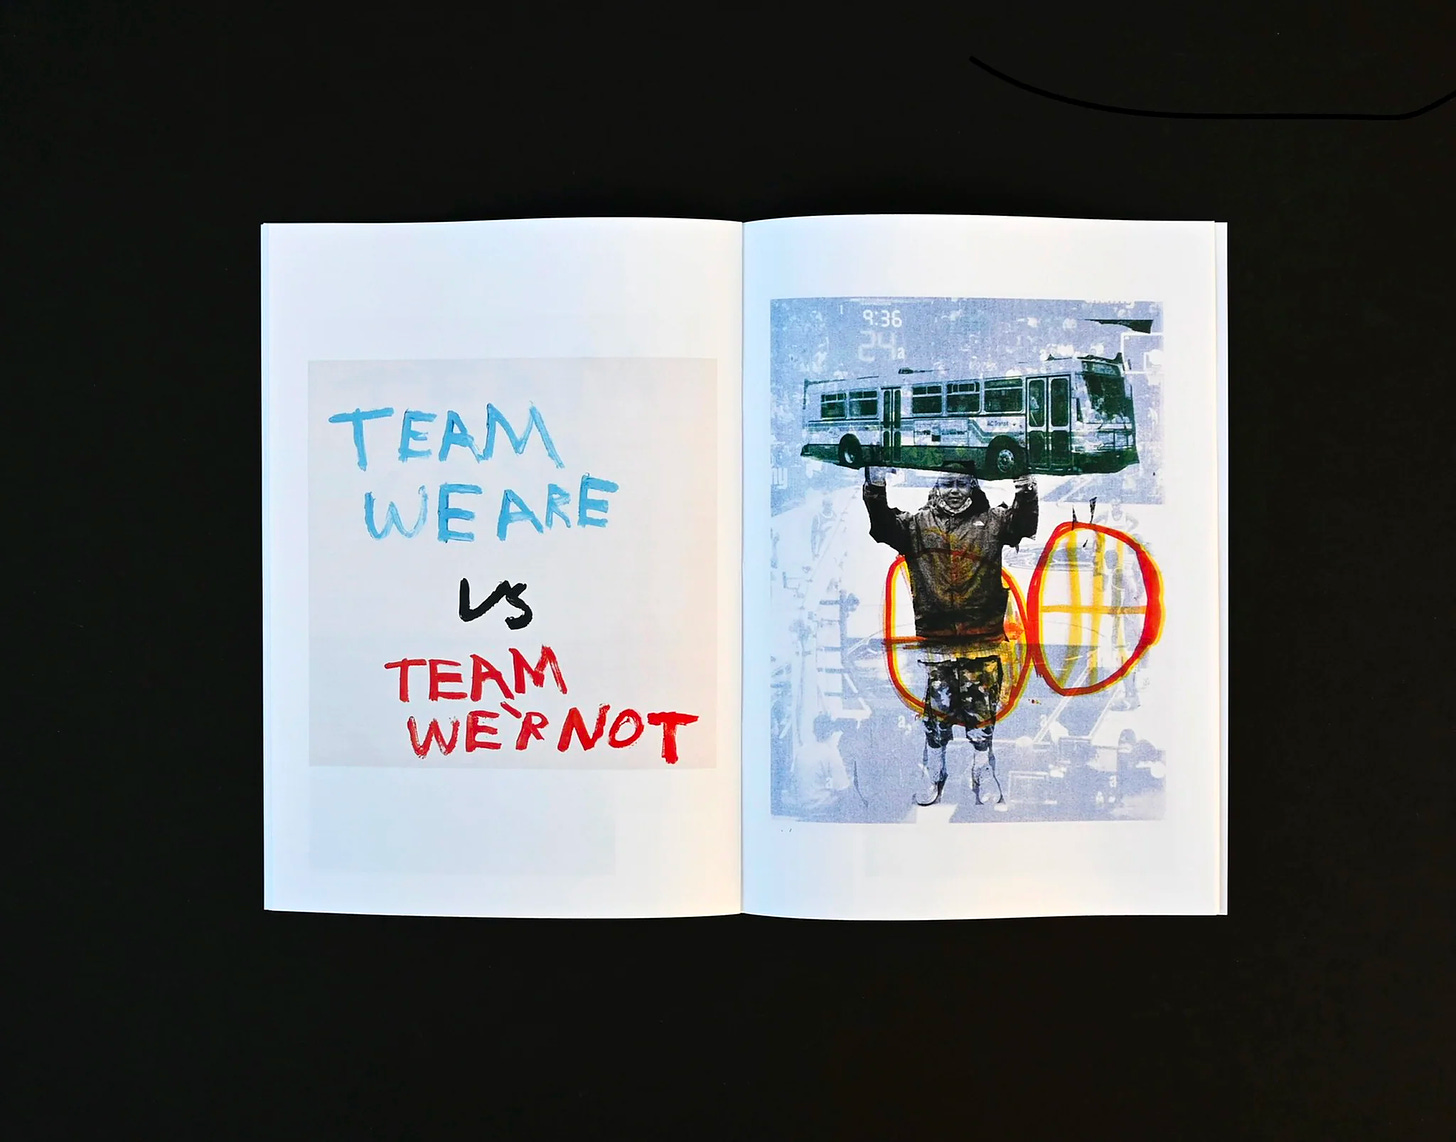 An open book shows two pages. On the left, a text drawing says Team we are vs Team we’r not. On the right, a collage shows a person holding a Muni bus over their head, with yellow and red basketballs drawn on top.